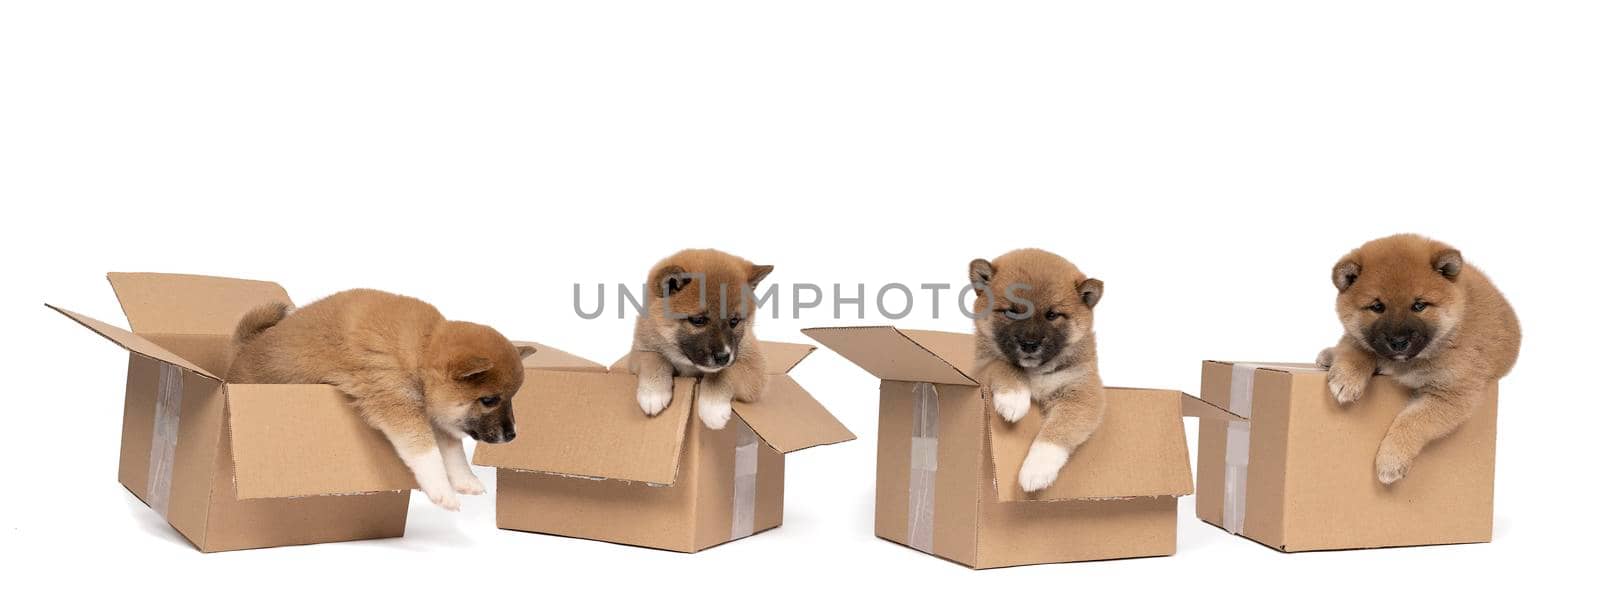 Four small Shiba Inu puppies sitting in a cardboard box isolated in a white background